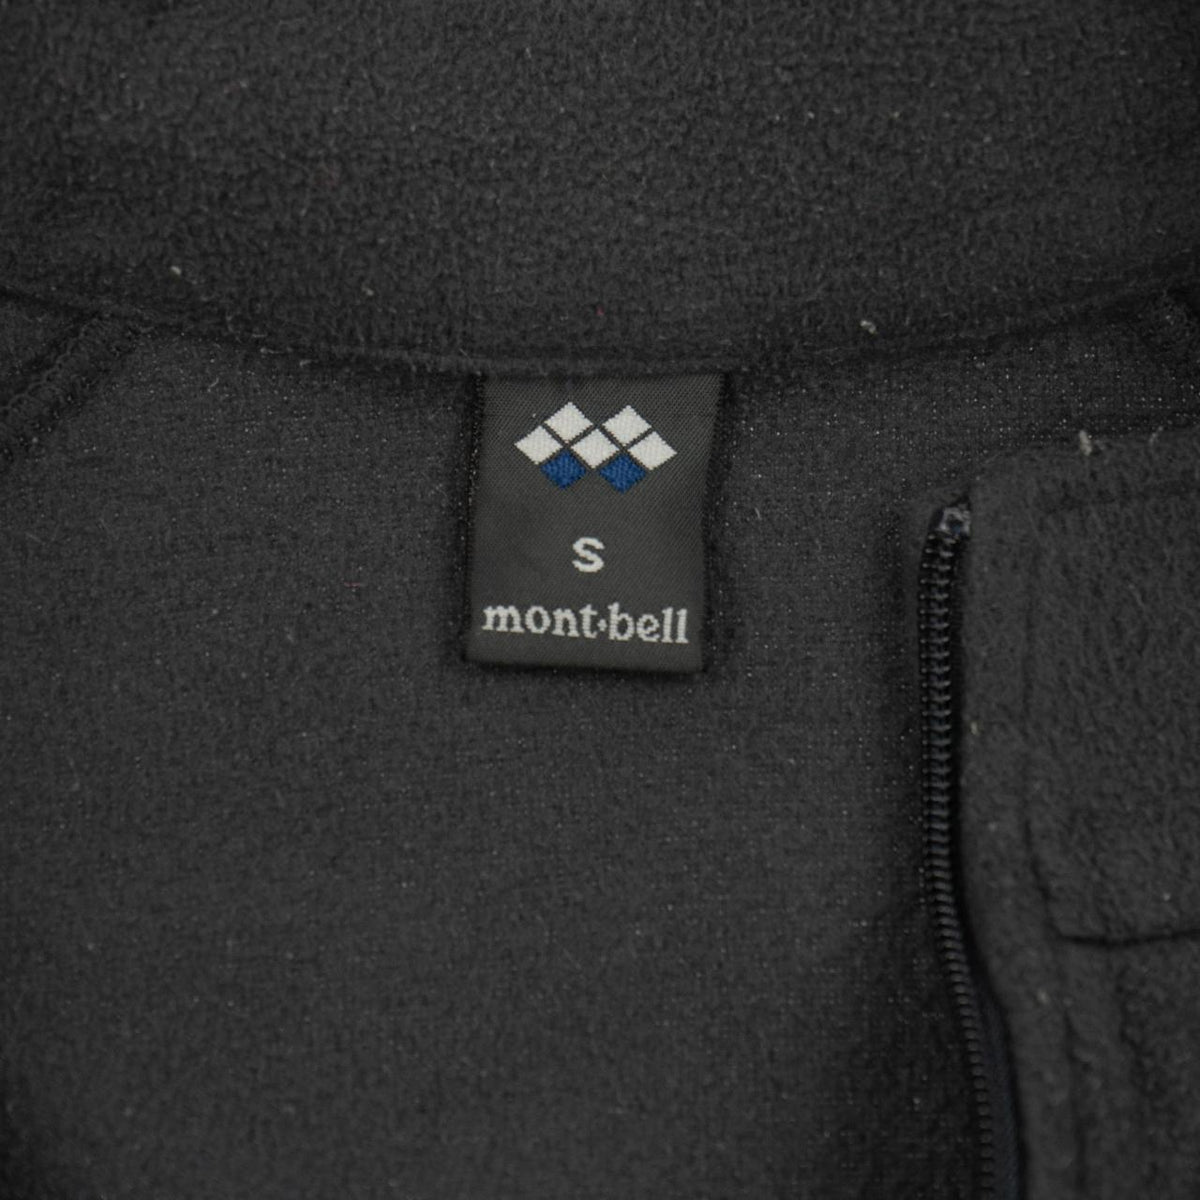 Vintage Montbell Zip Jacket Size XS